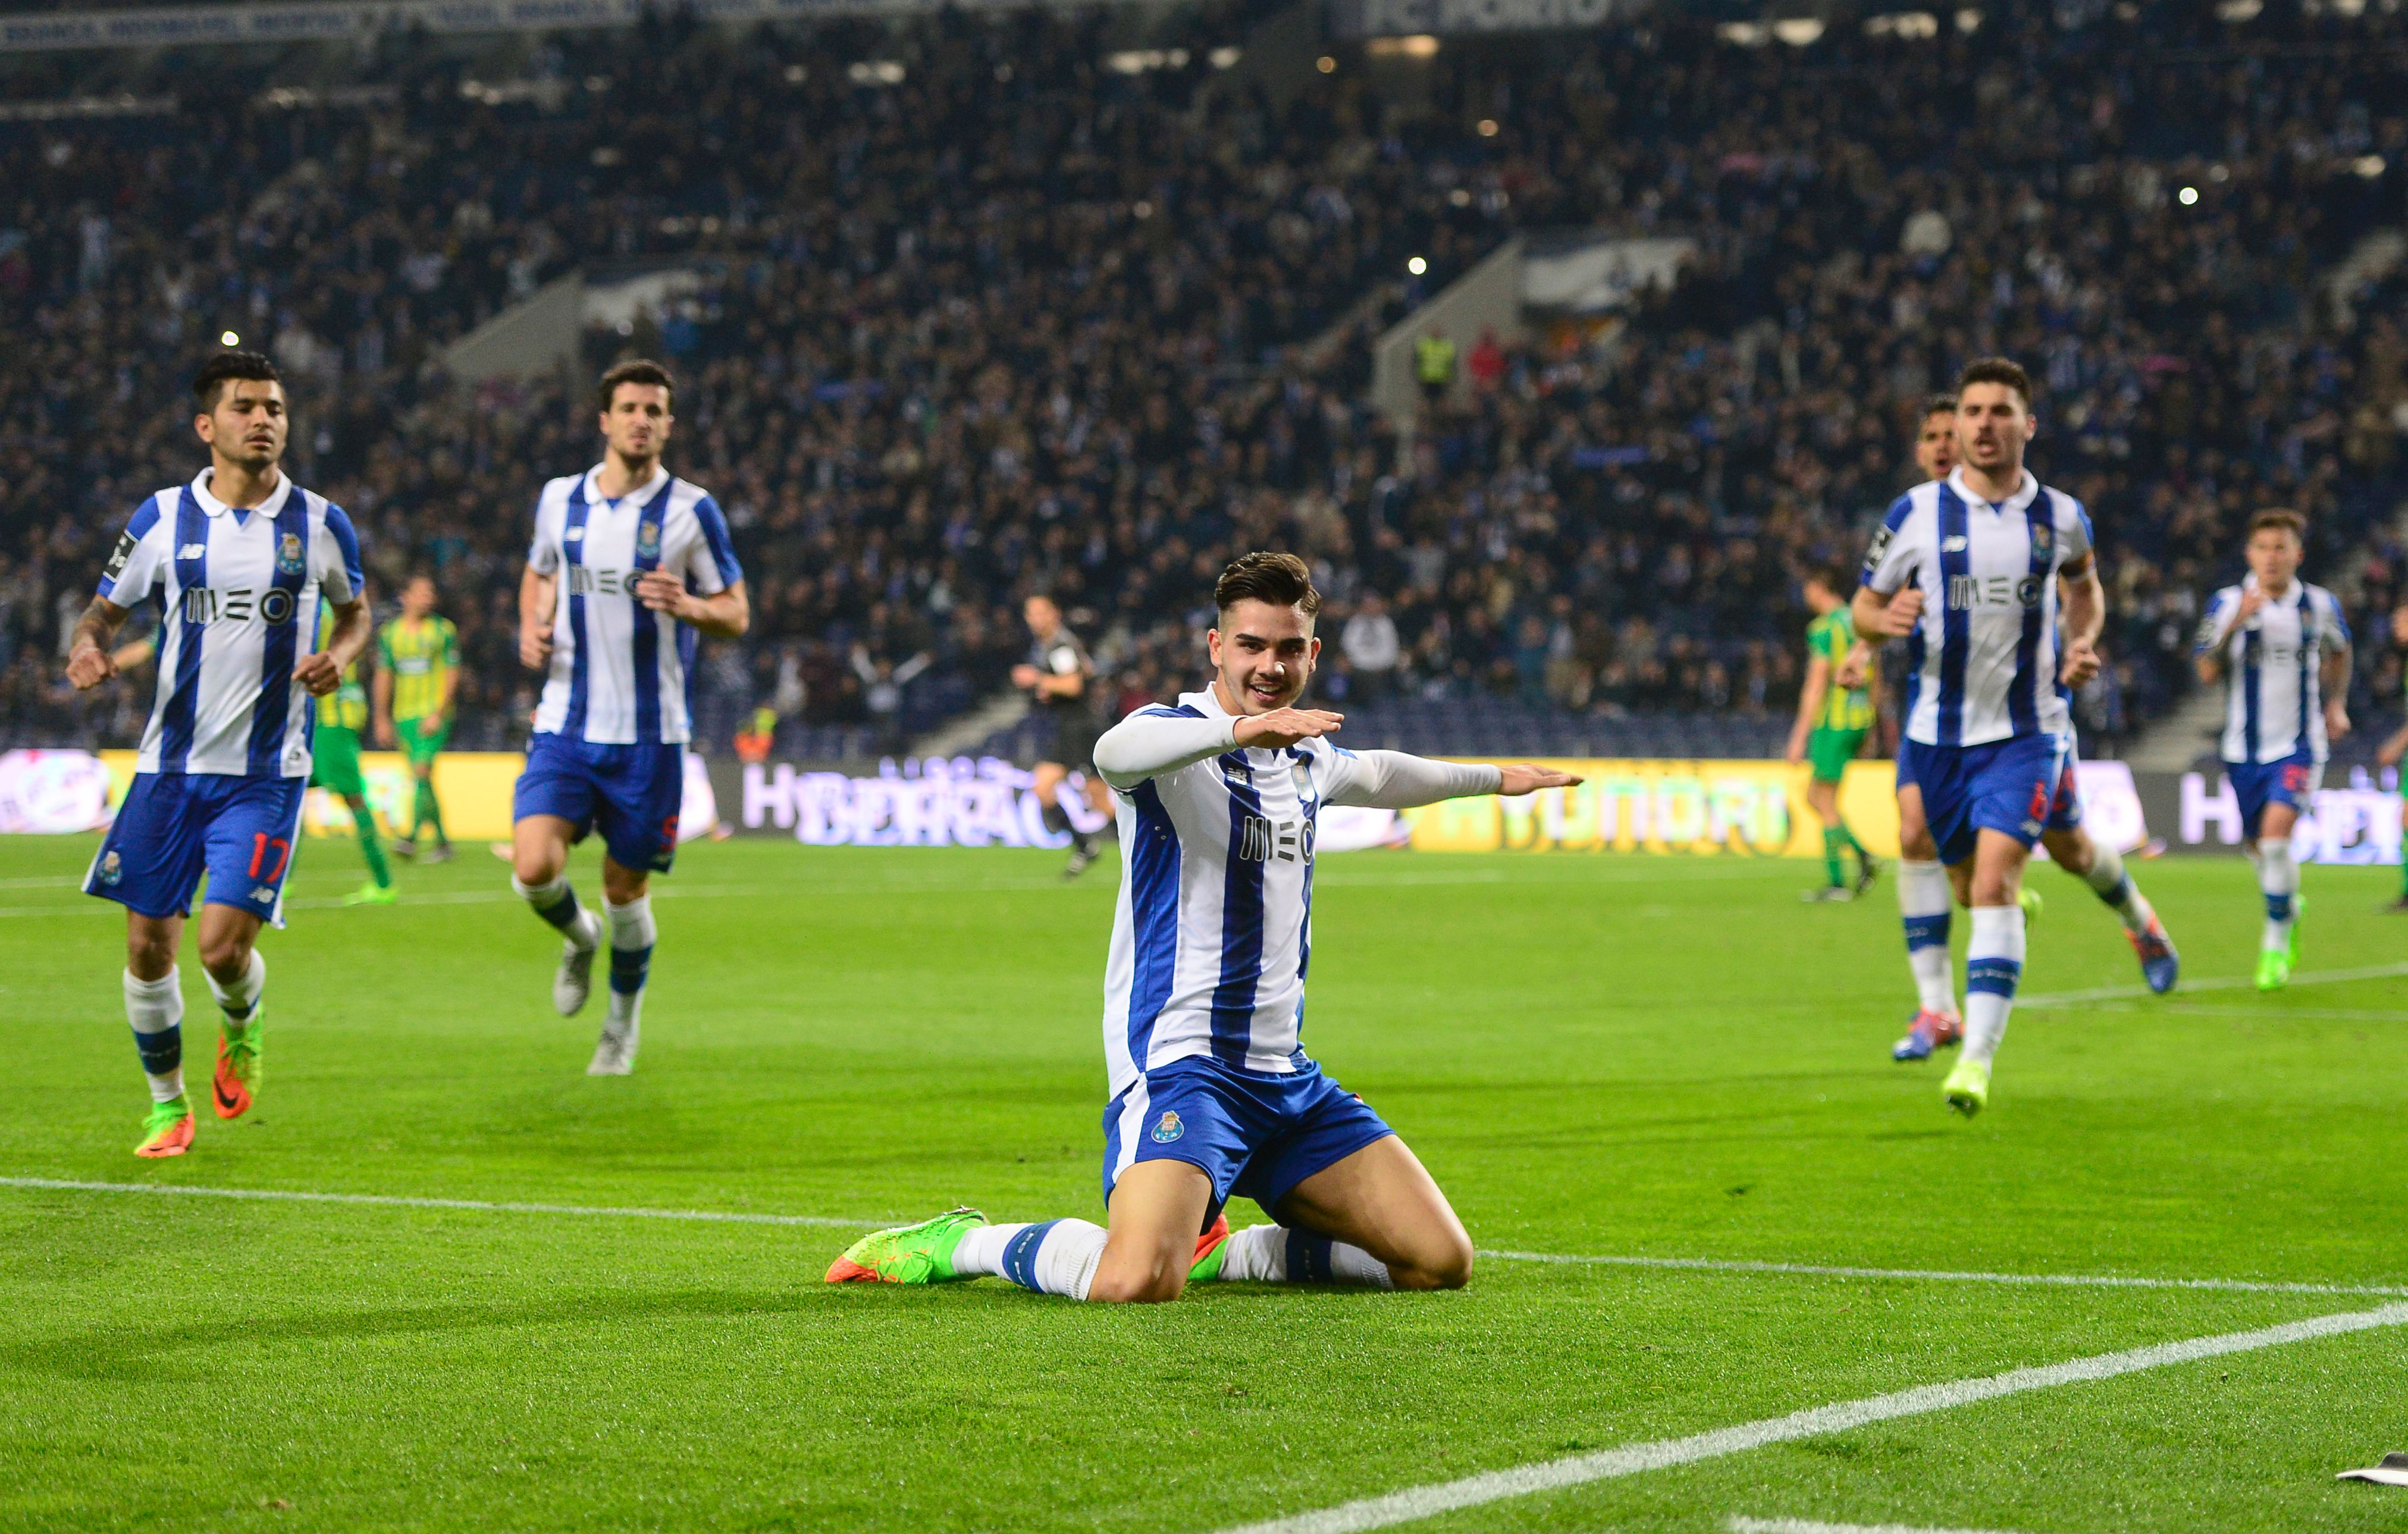 Porto's forward Andre Silva (C) celebrates after scoring the opening goal during the Portuguese league football match FC Porto vs CD Tondela at the Dragao stadium in Porto on February 17, 2017. / AFP / MIGUEL RIOPA        (Photo credit should read MIGUEL RIOPA/AFP/Getty Images)